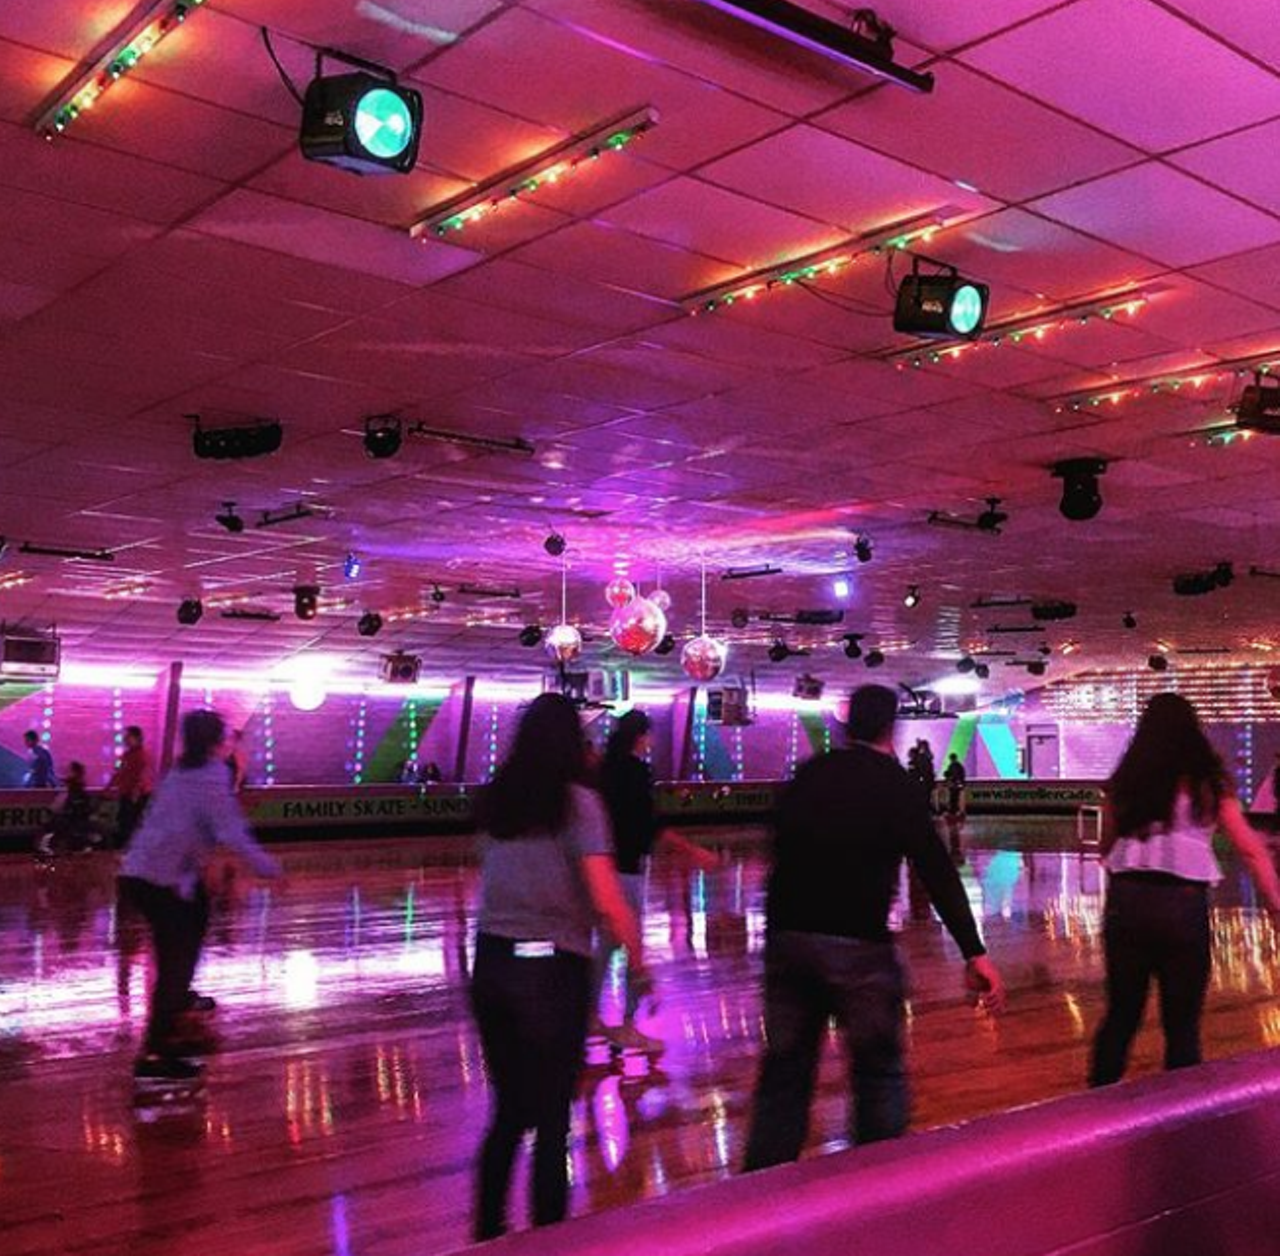 Take your shot at skating at the Rollercade
223 Recoleta Road, (210) 826-6361, therollercade.com
If you’re willing to go to the edge of your comfort zone, head on over to the Rollercade. This longstanding roller rink bumps disco tunes so you and your date can jam out or hold hands as you make laps. Even if there’s other people skating, you’ll be too focused on keeping on your feet to pay attention to anybody there.
Photo via Instagram / lovethehk